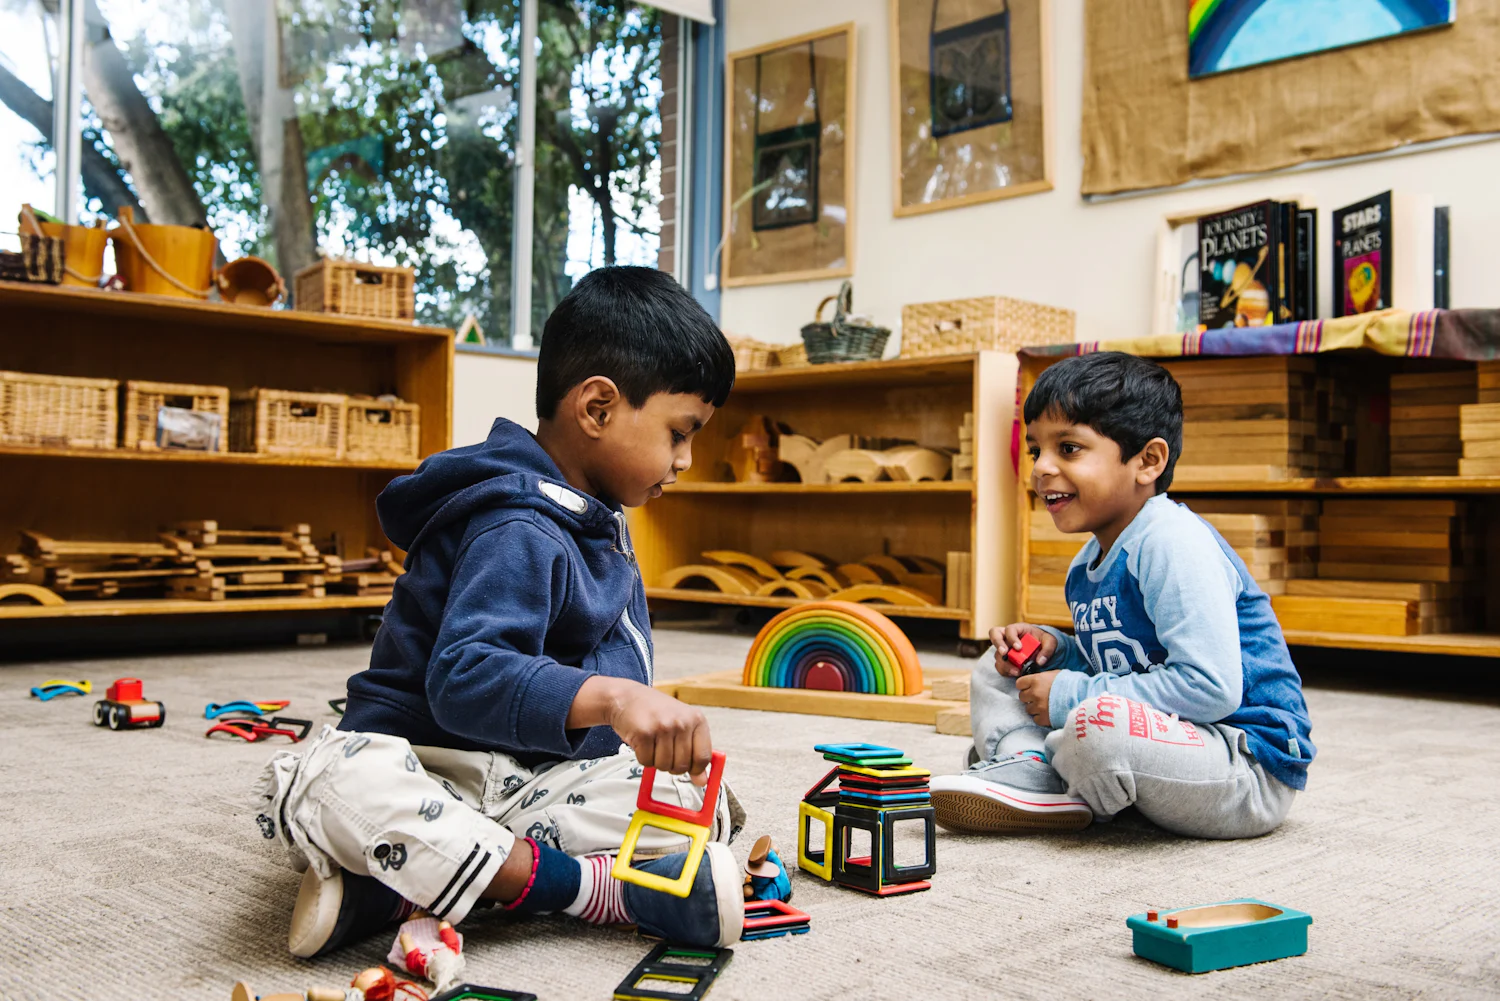 Child care center Westmead